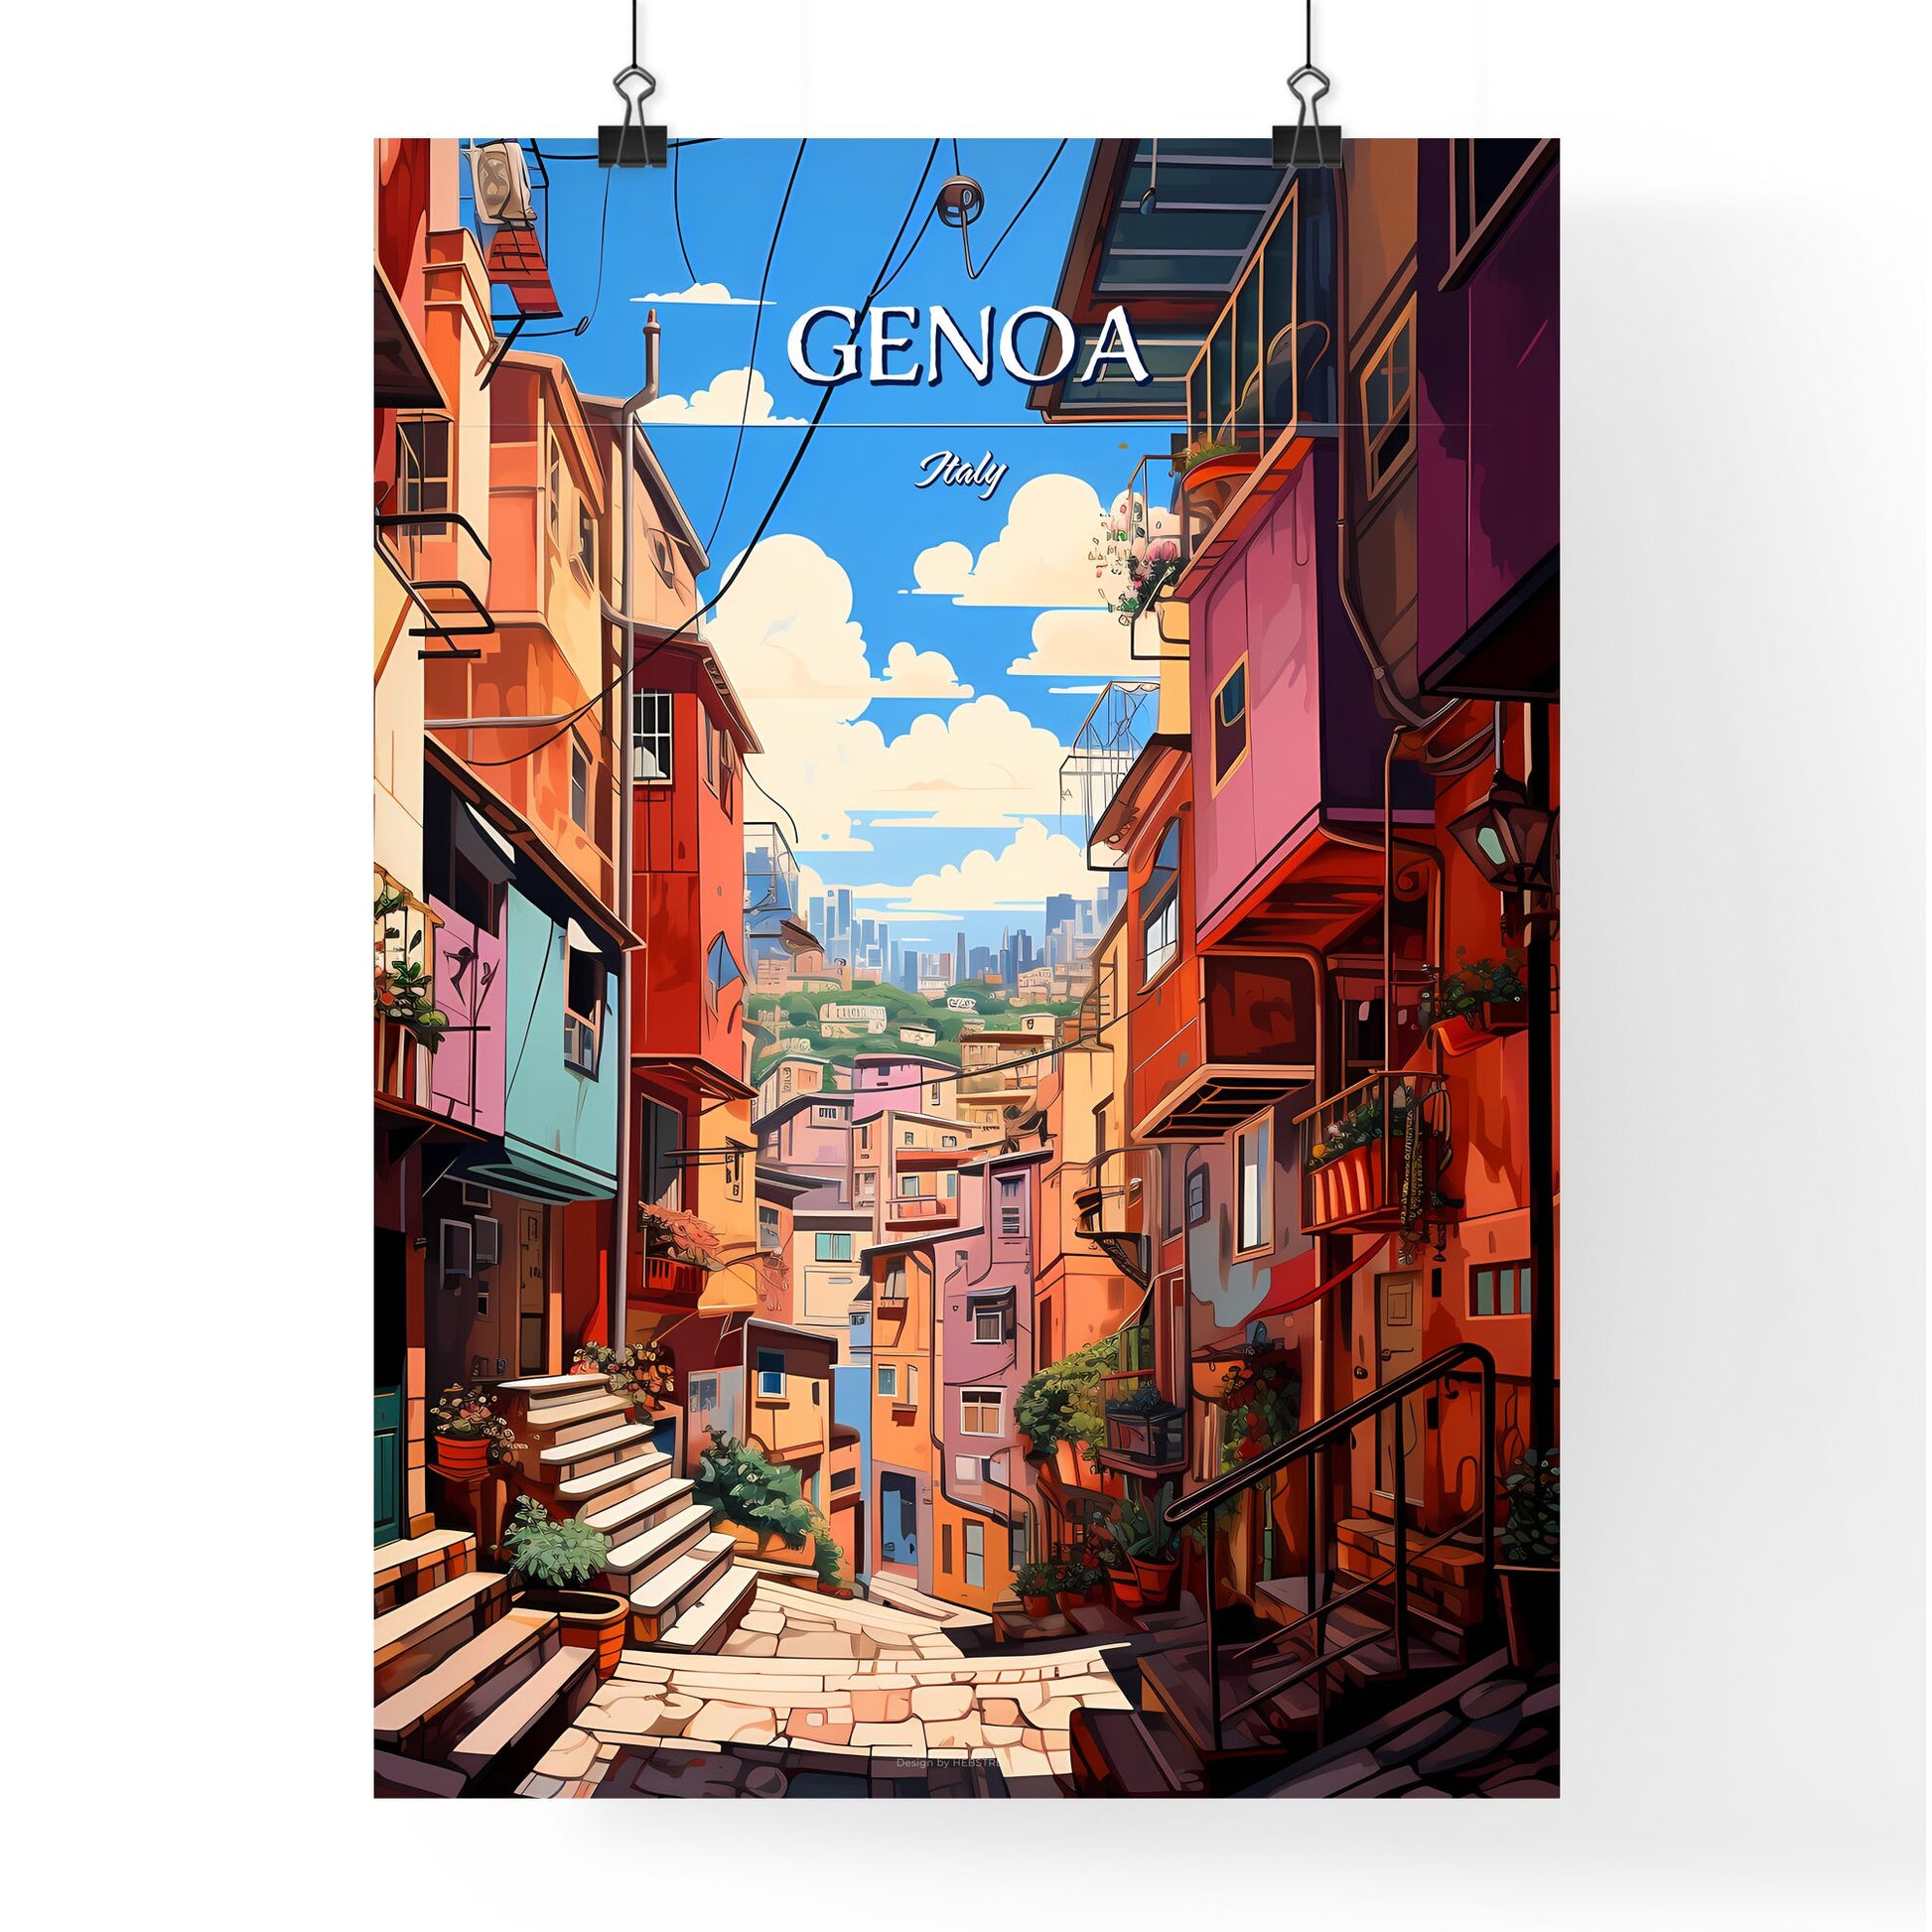 Genoa, Italy - Art print of a colorful buildings in Little Italy Default Title